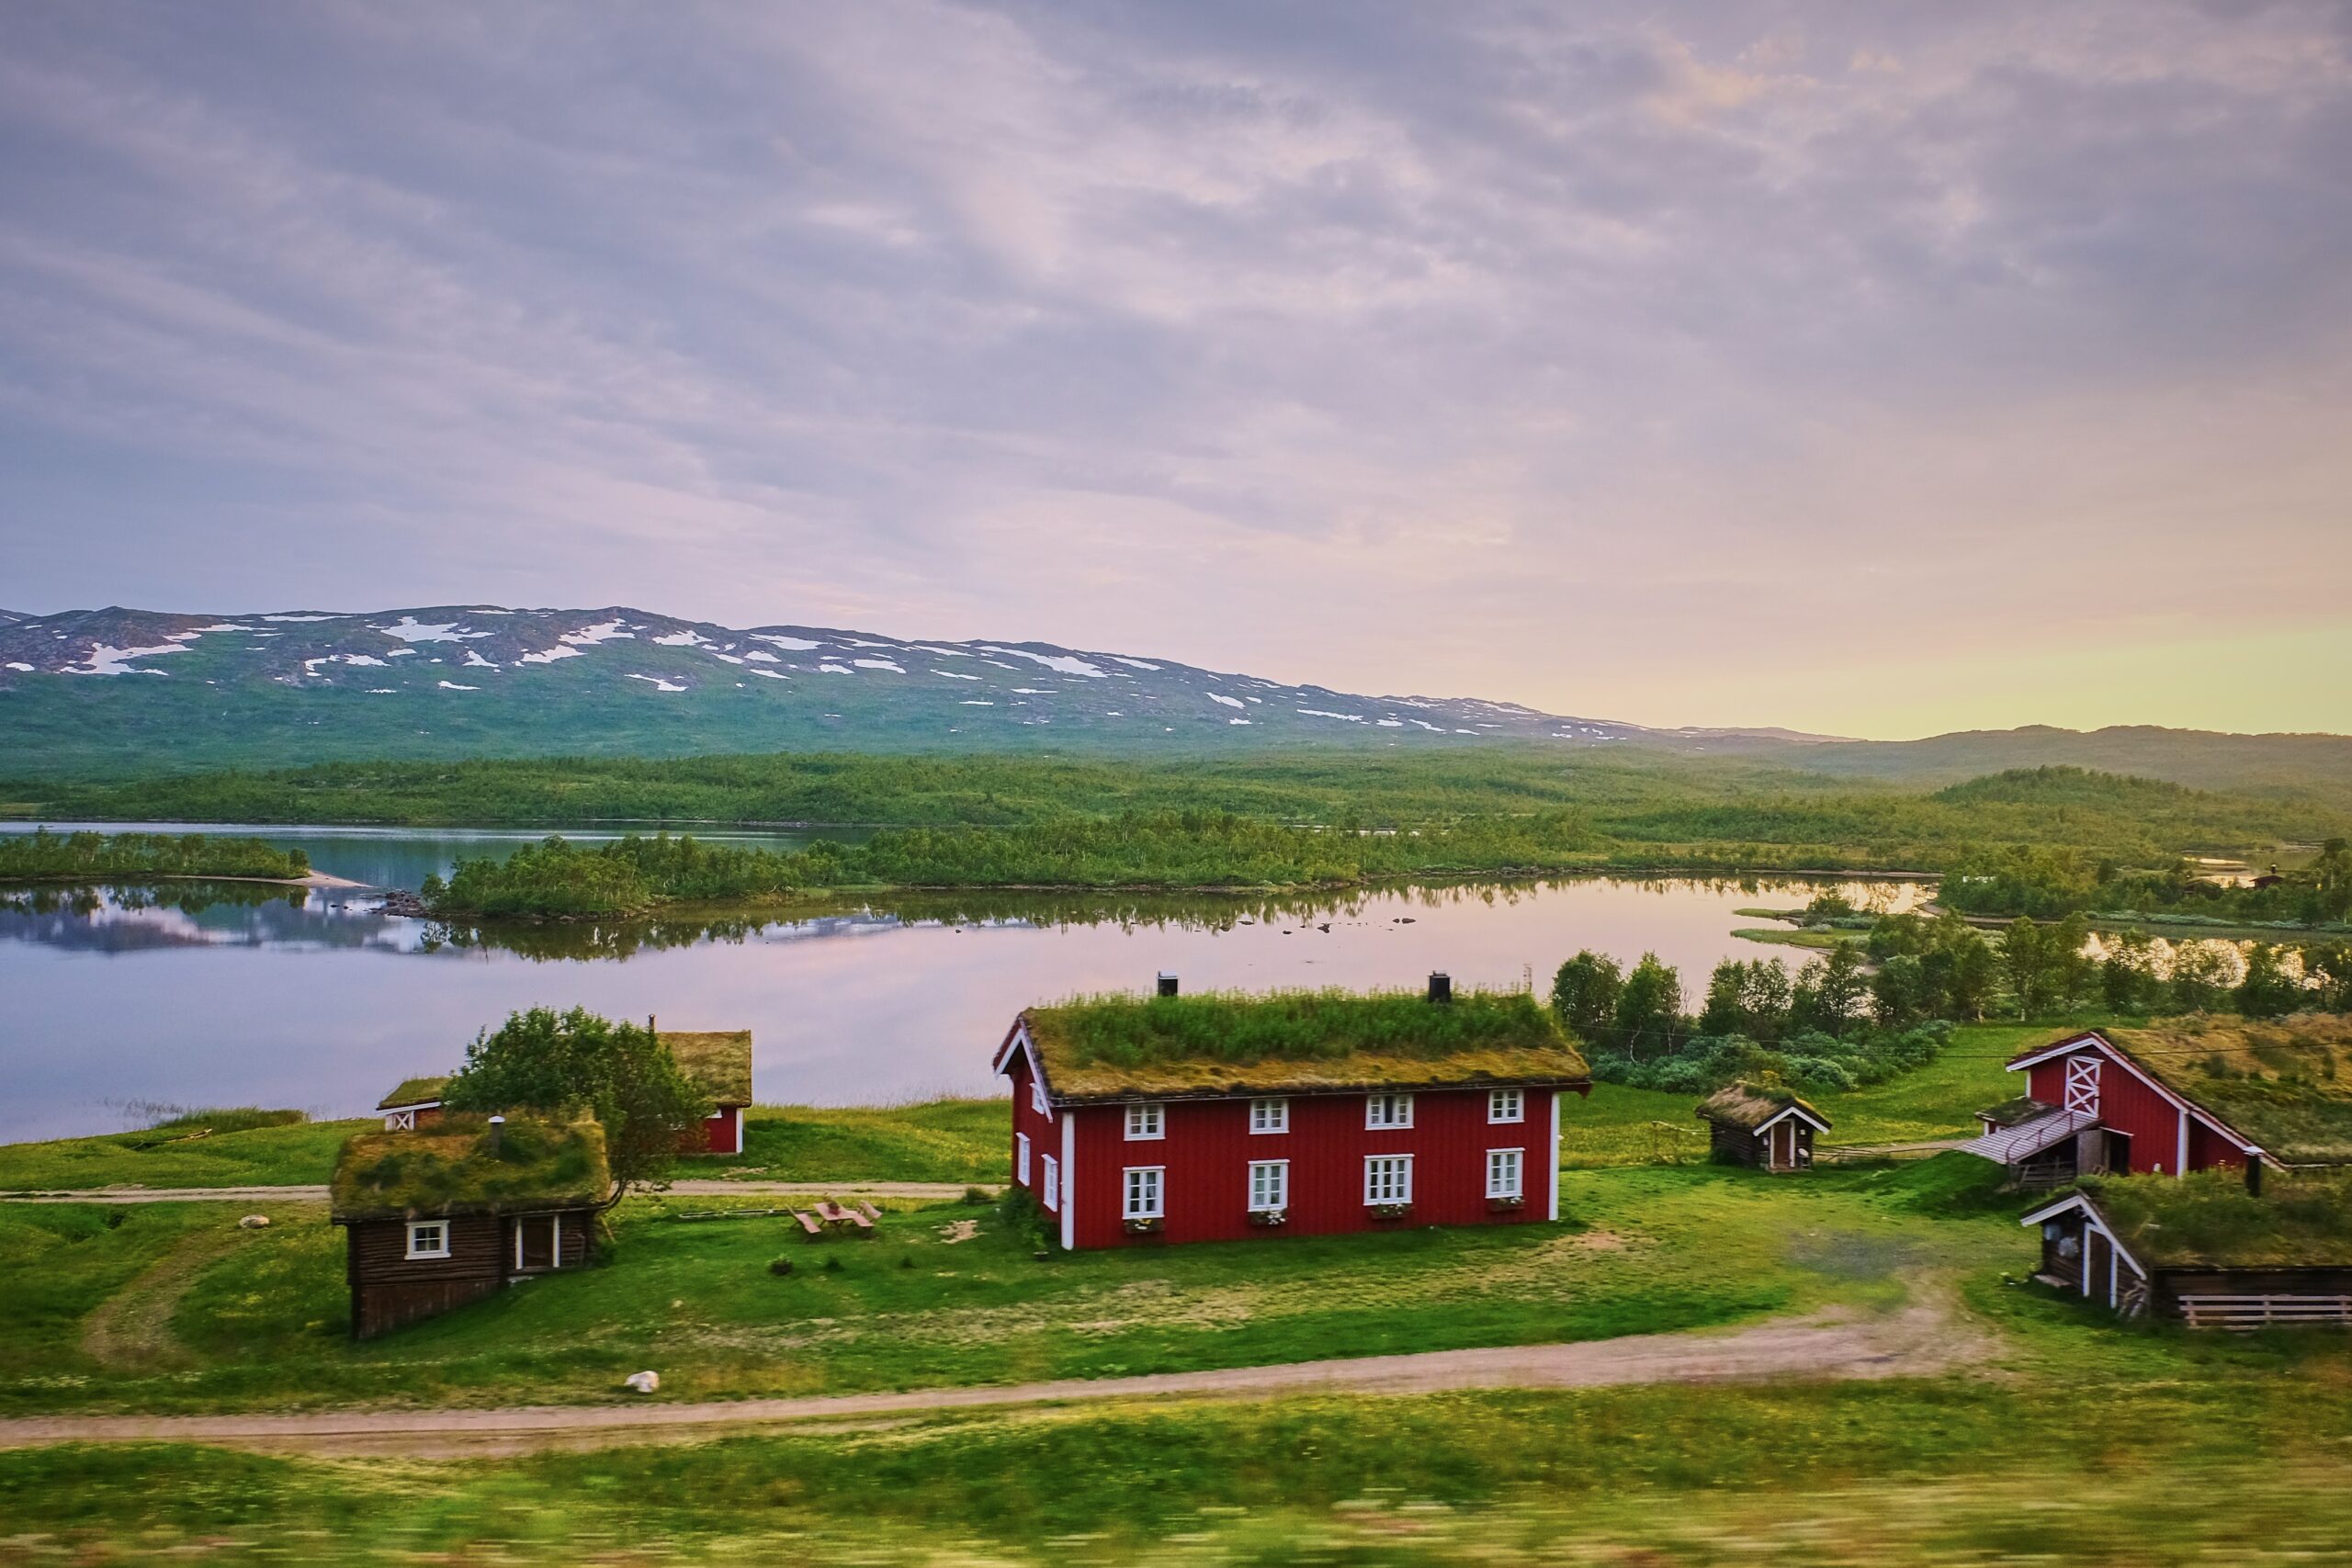 How Sweden continues to set the benchmark as one of the world’s most sustainable countries